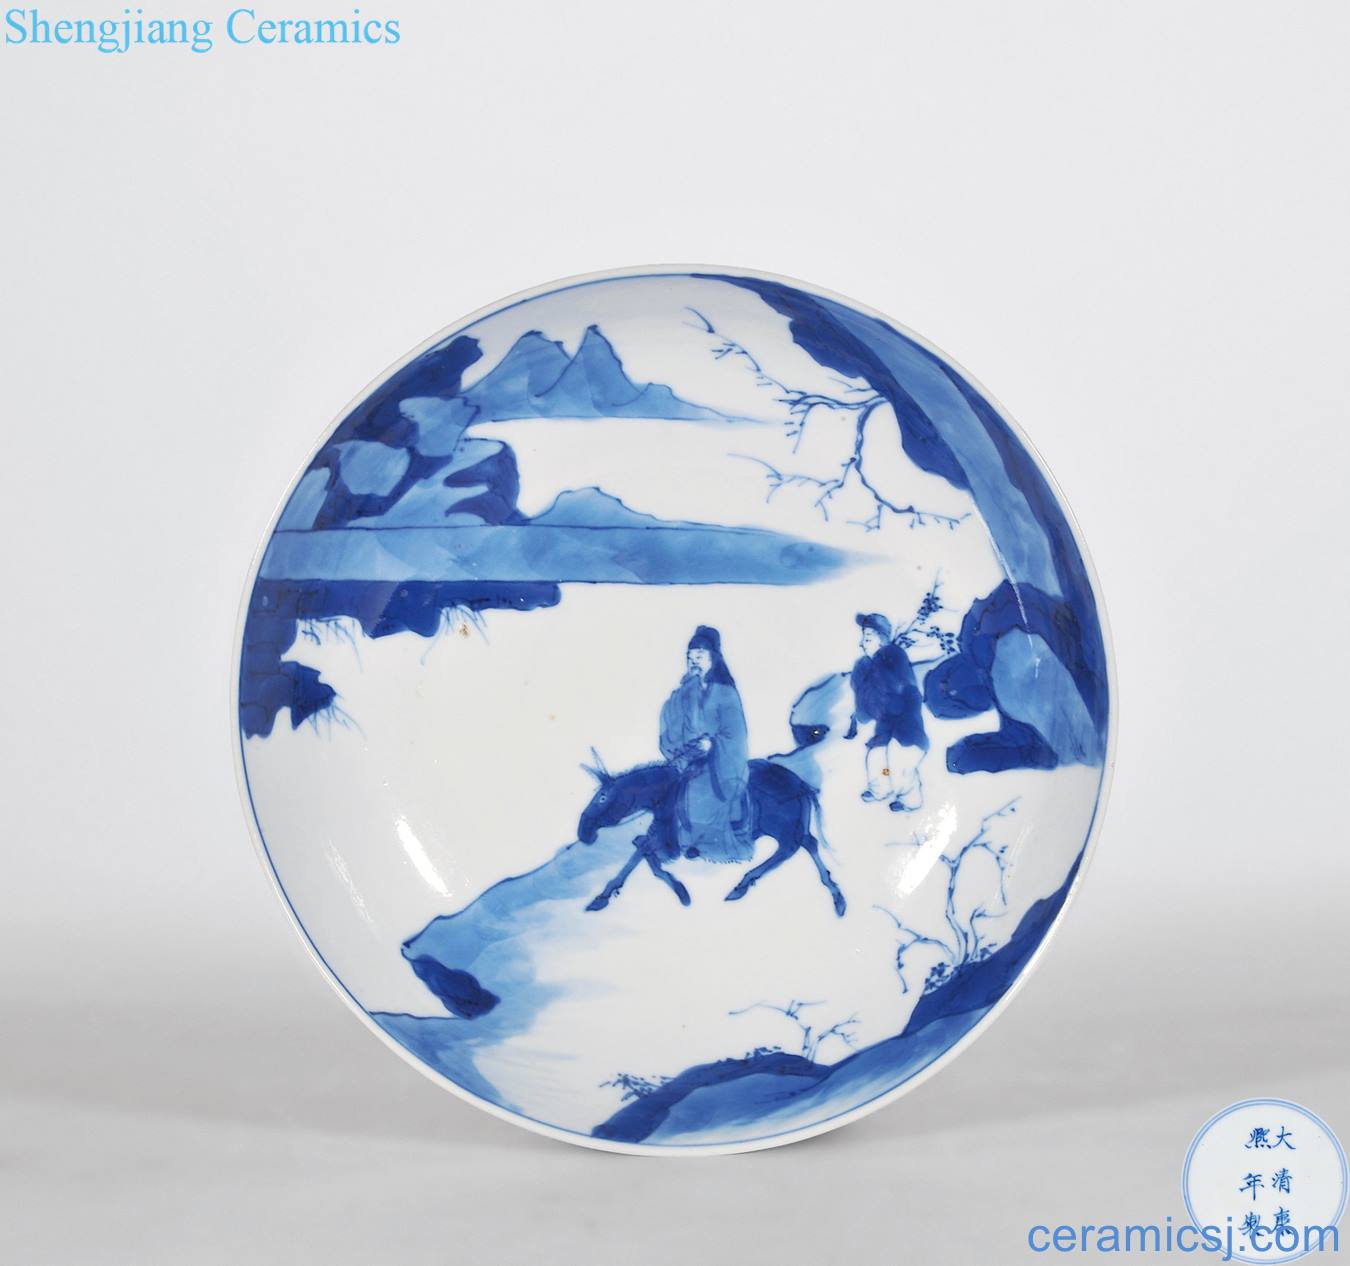 The qing emperor kangxi Blue and white find mei figure plate through the snow